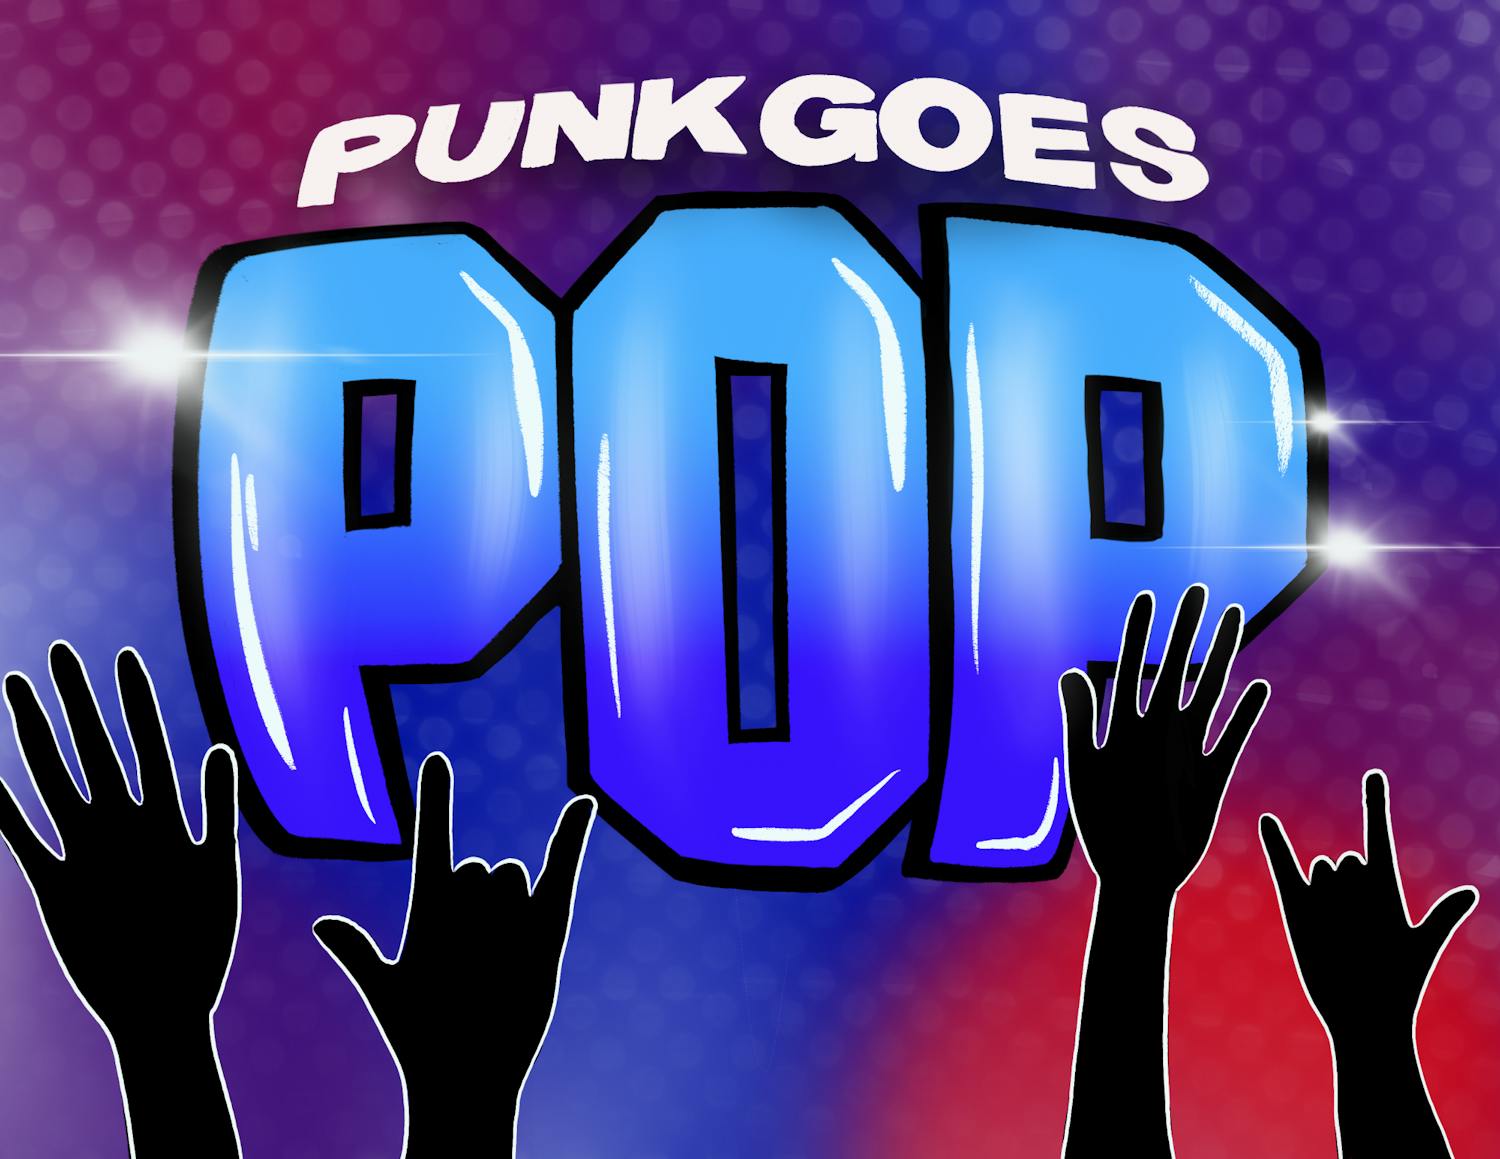 Top “Punk Goes Pop” songs The Post